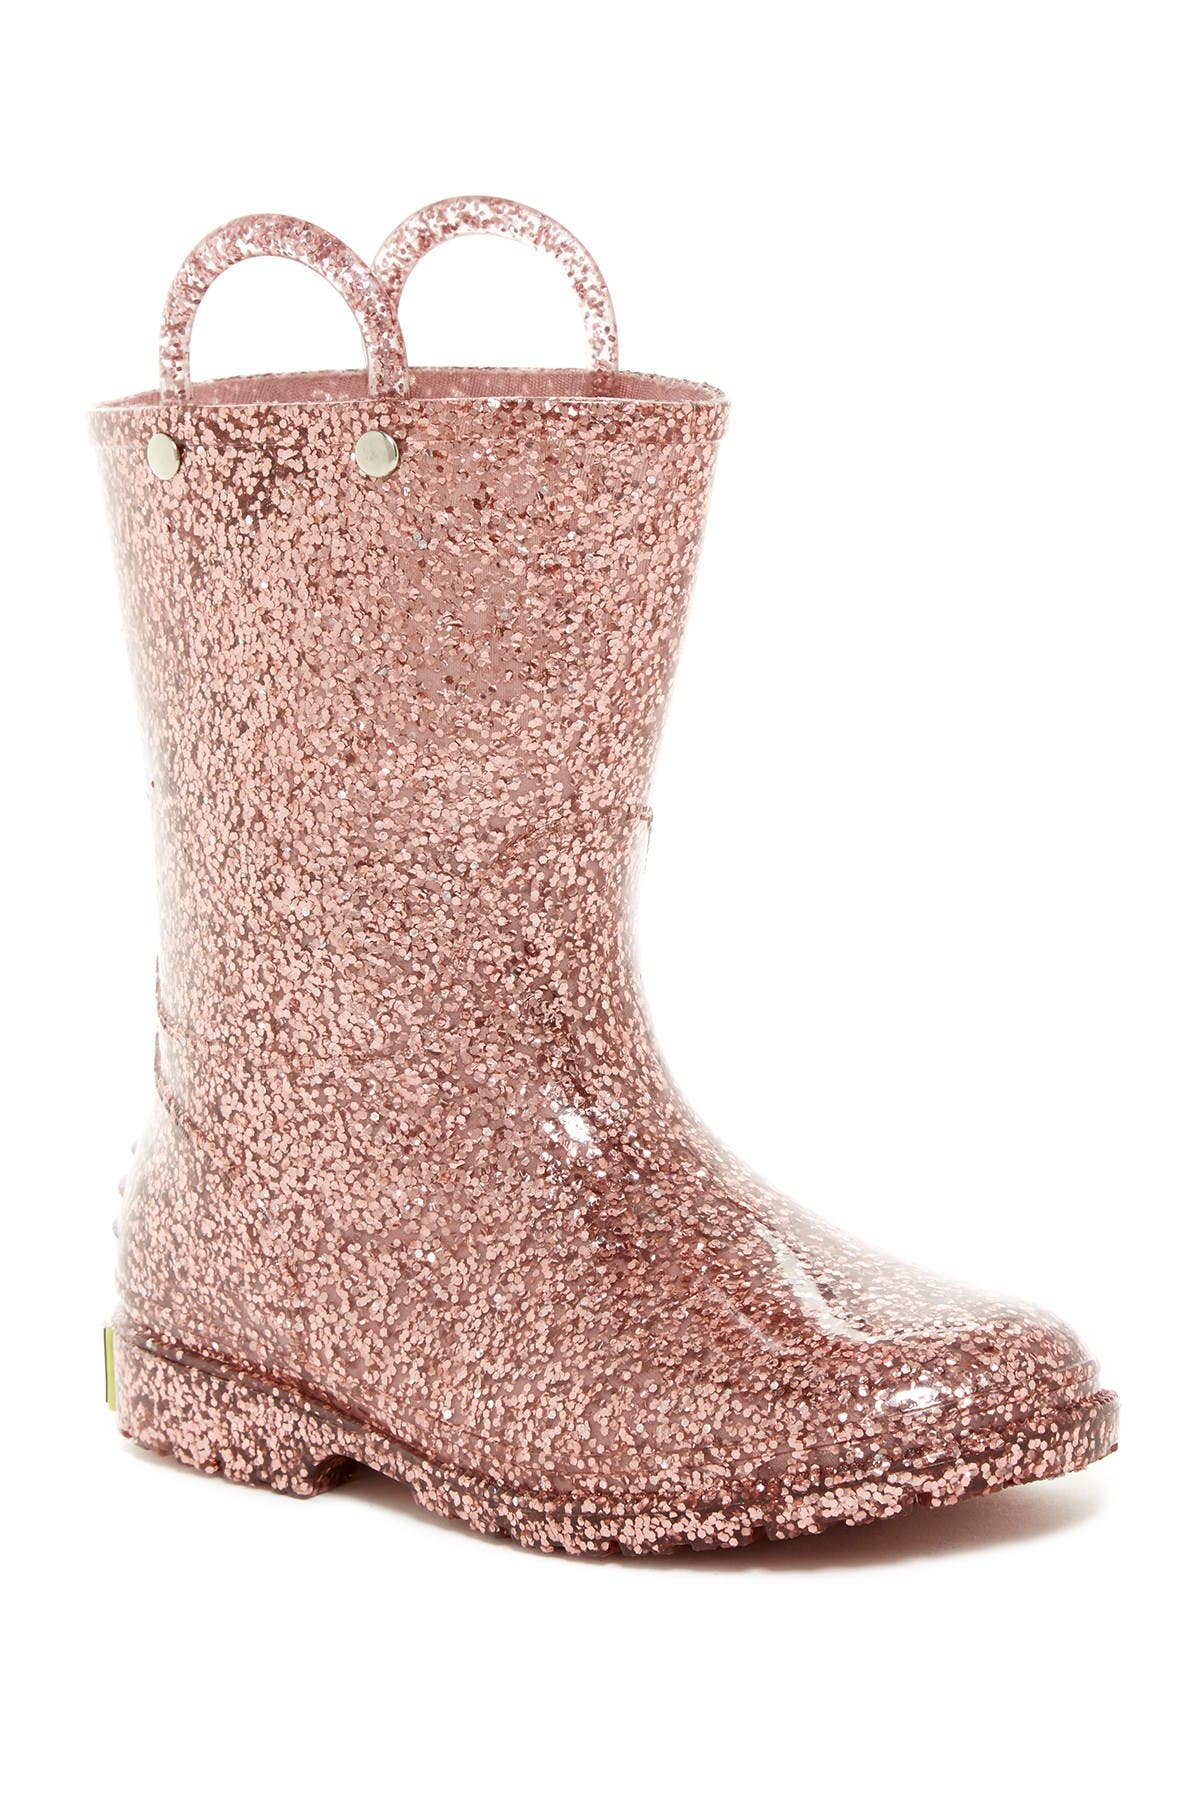 gold glitter boots for toddlers